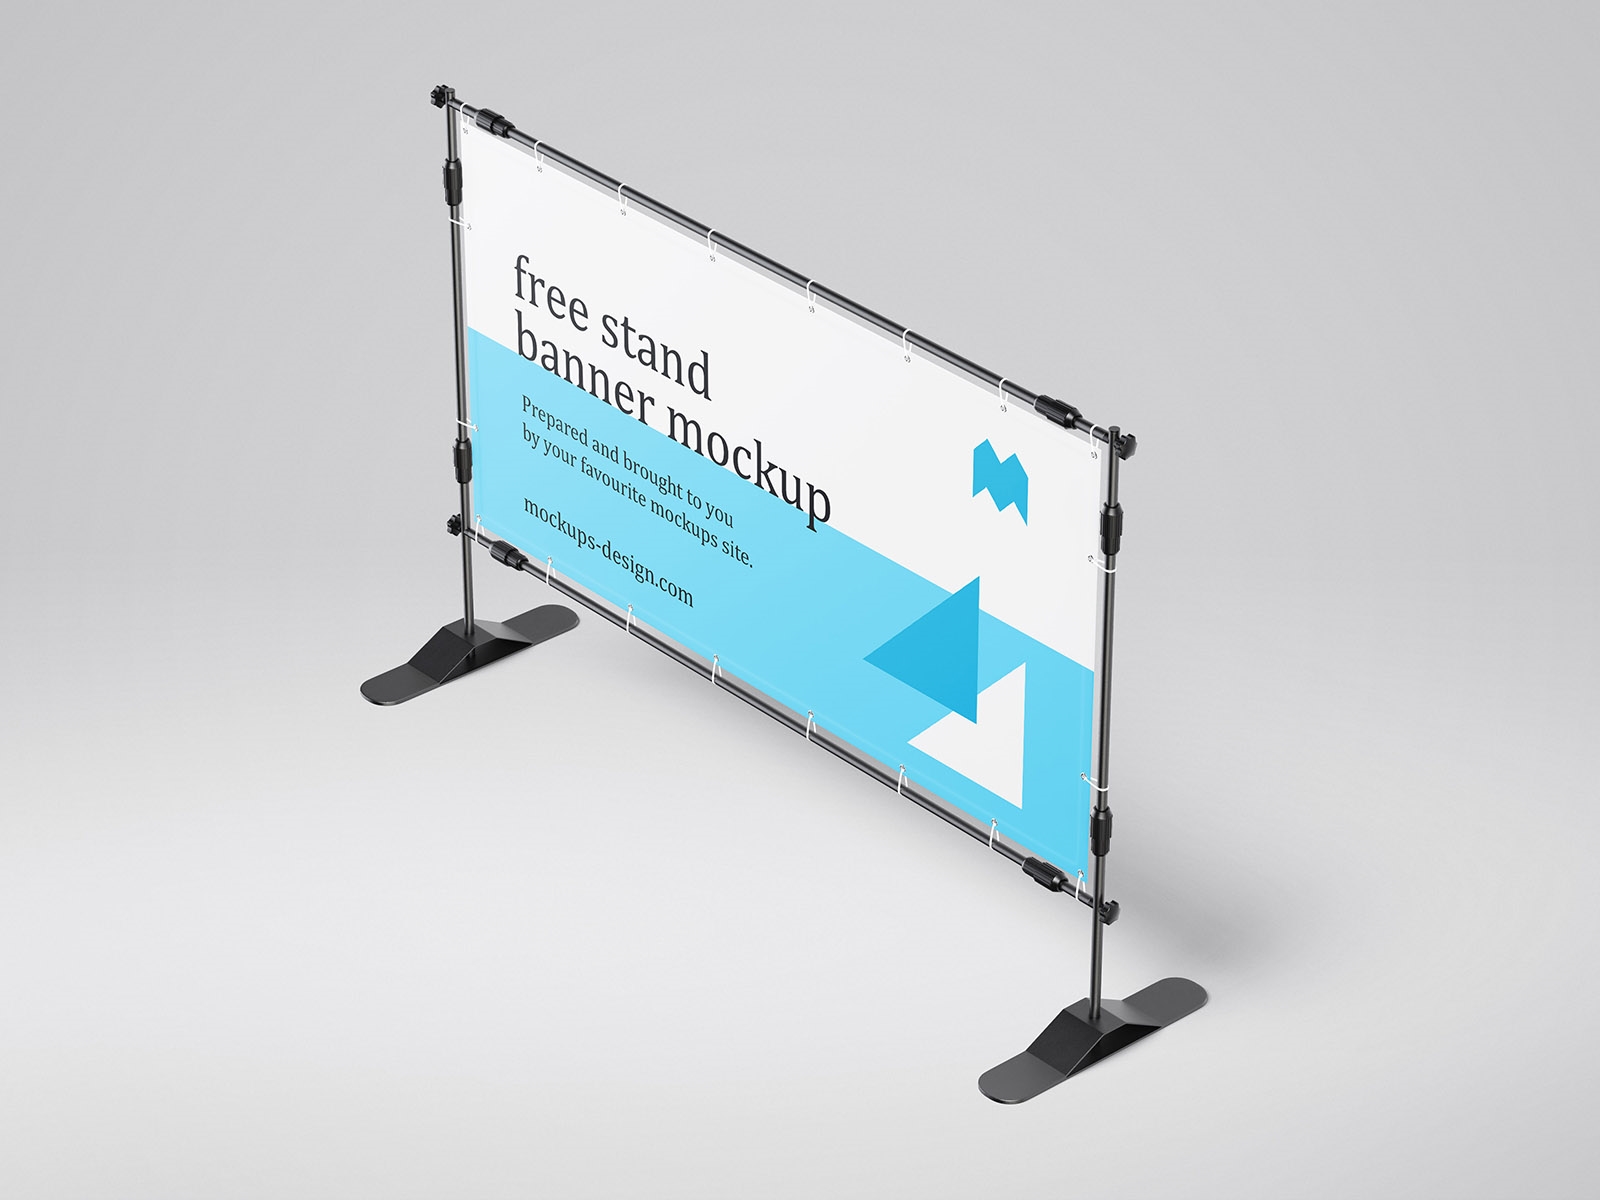 4 Different Angles Banner Stand Mockups FREE PSD